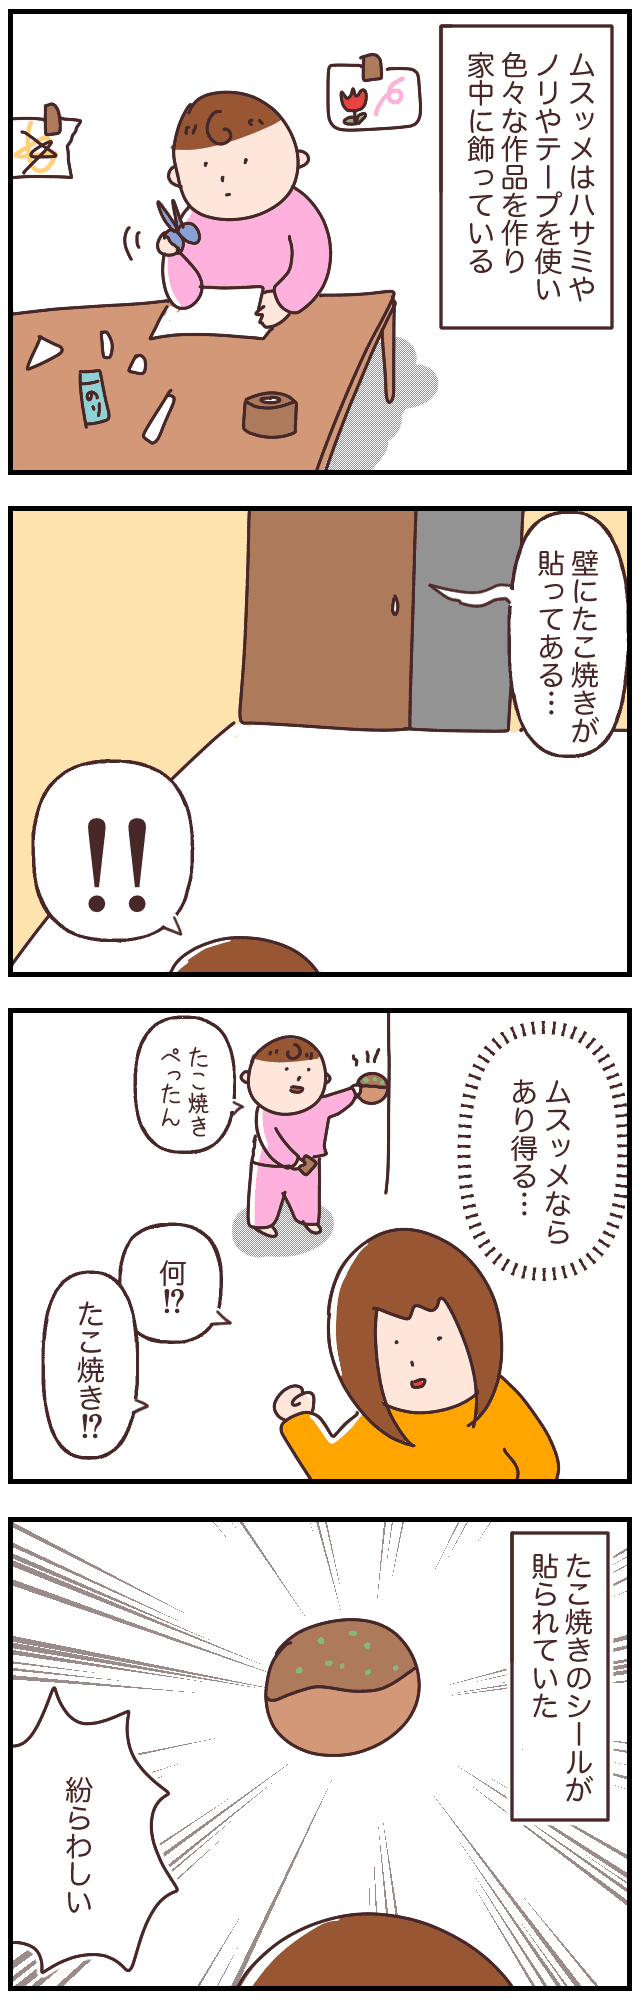 Takoyaki on the wall is Akan! (Sweat) I was worried that my daughter would do something about it...it's confusing! ｜Mama's childcare manga